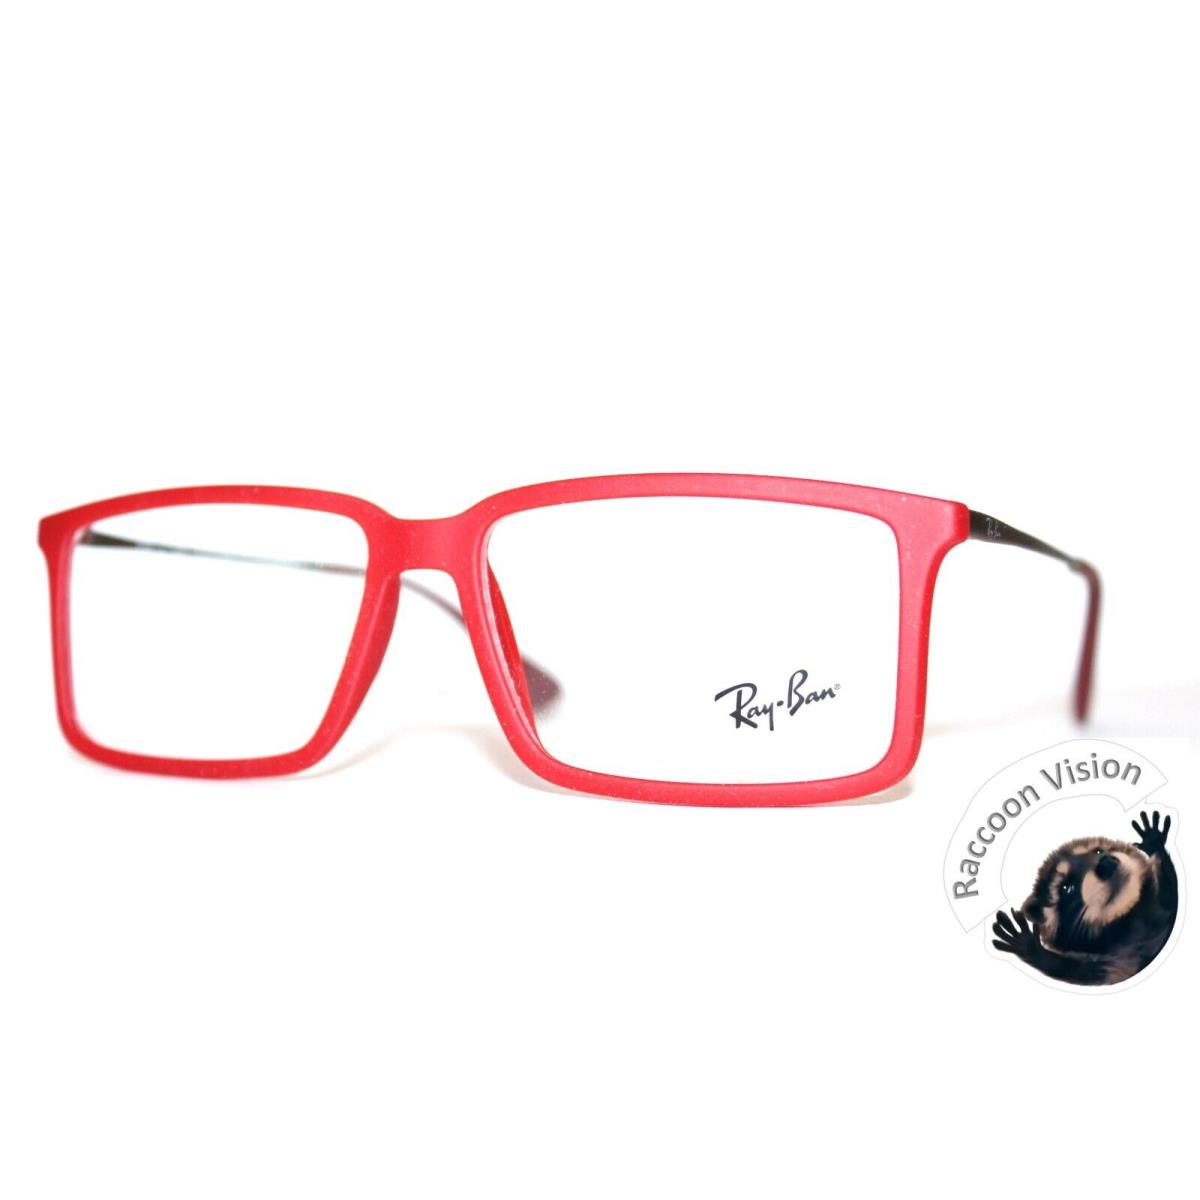 Ray-ban RB 7043 5468 Rubber Red Eyeglasses RB7043 52-14-140